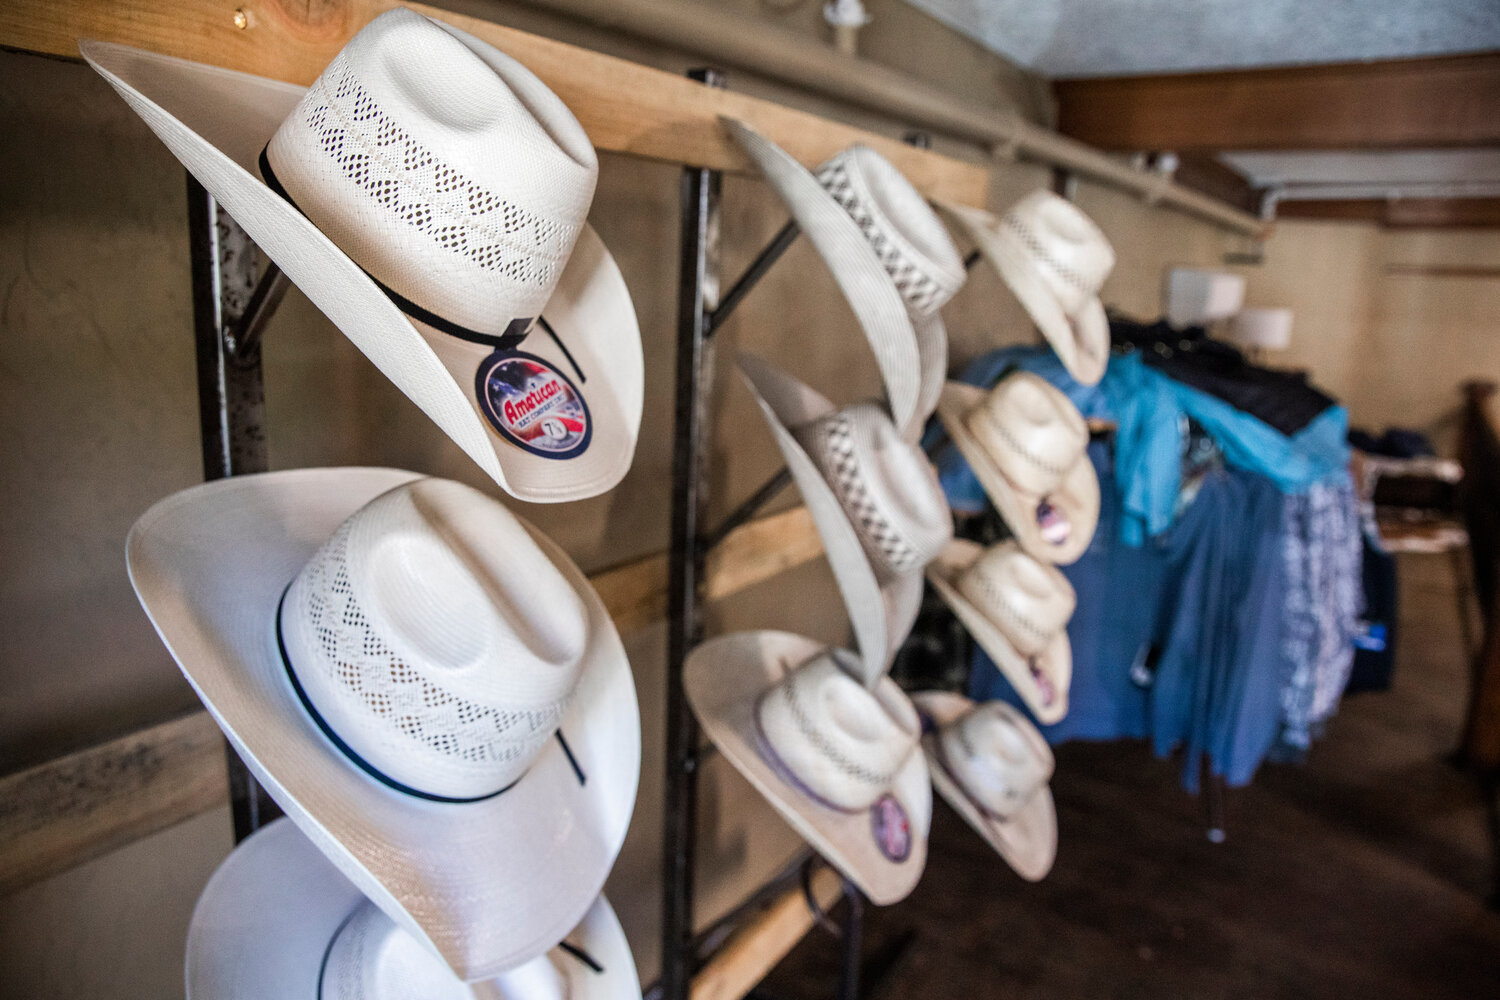 Cowboys hats sit on display inside Saddle Bum Monday, May 8, in downtown Centralia.